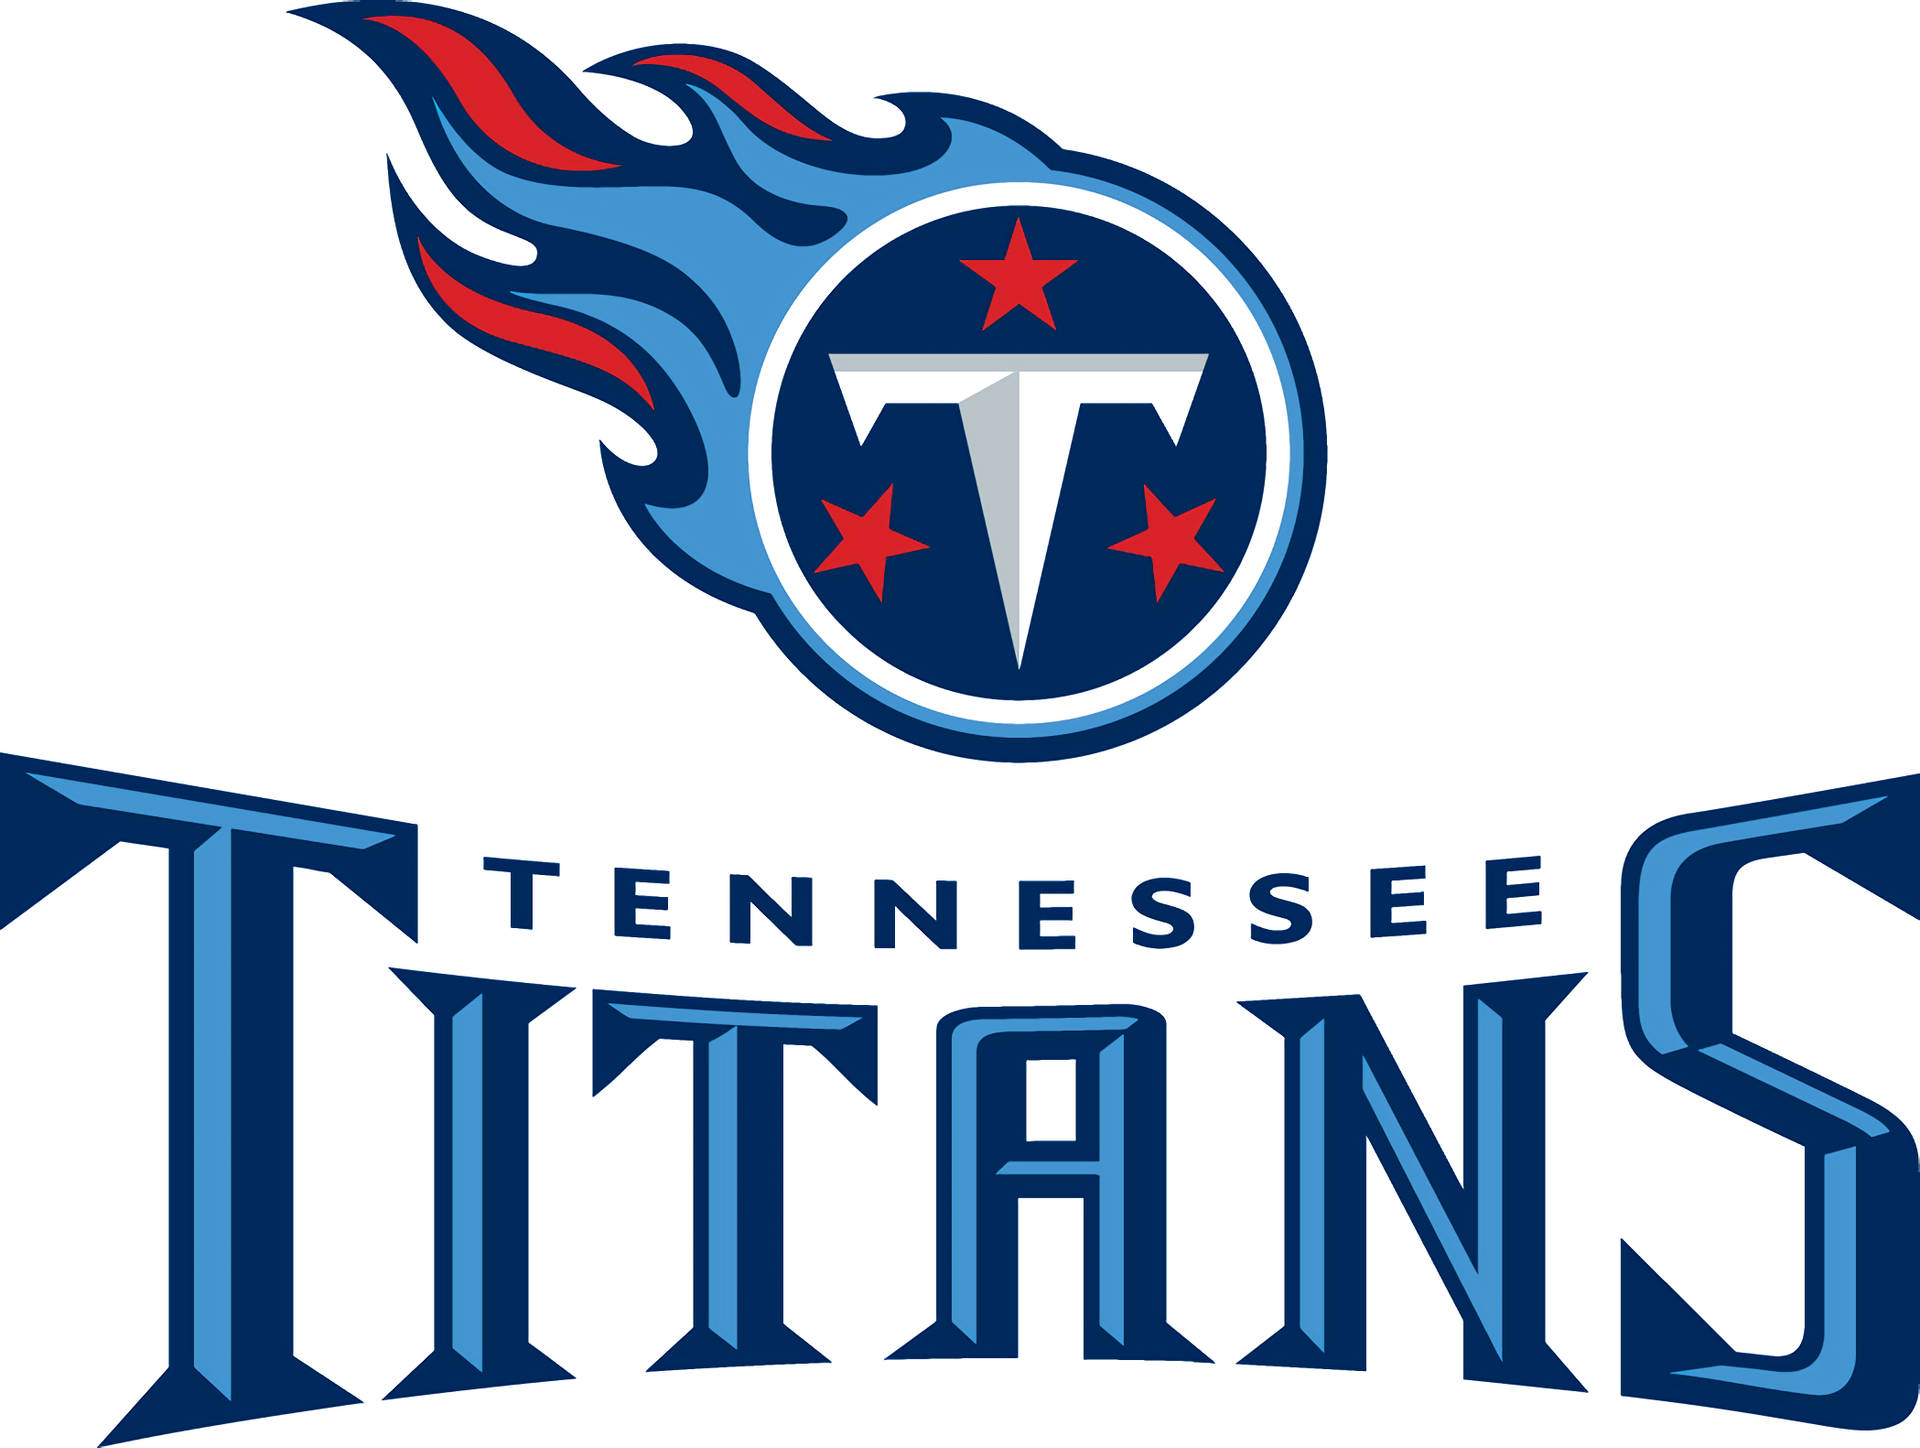 Tennessee Titans 2098X1582 Wallpaper and Background Image